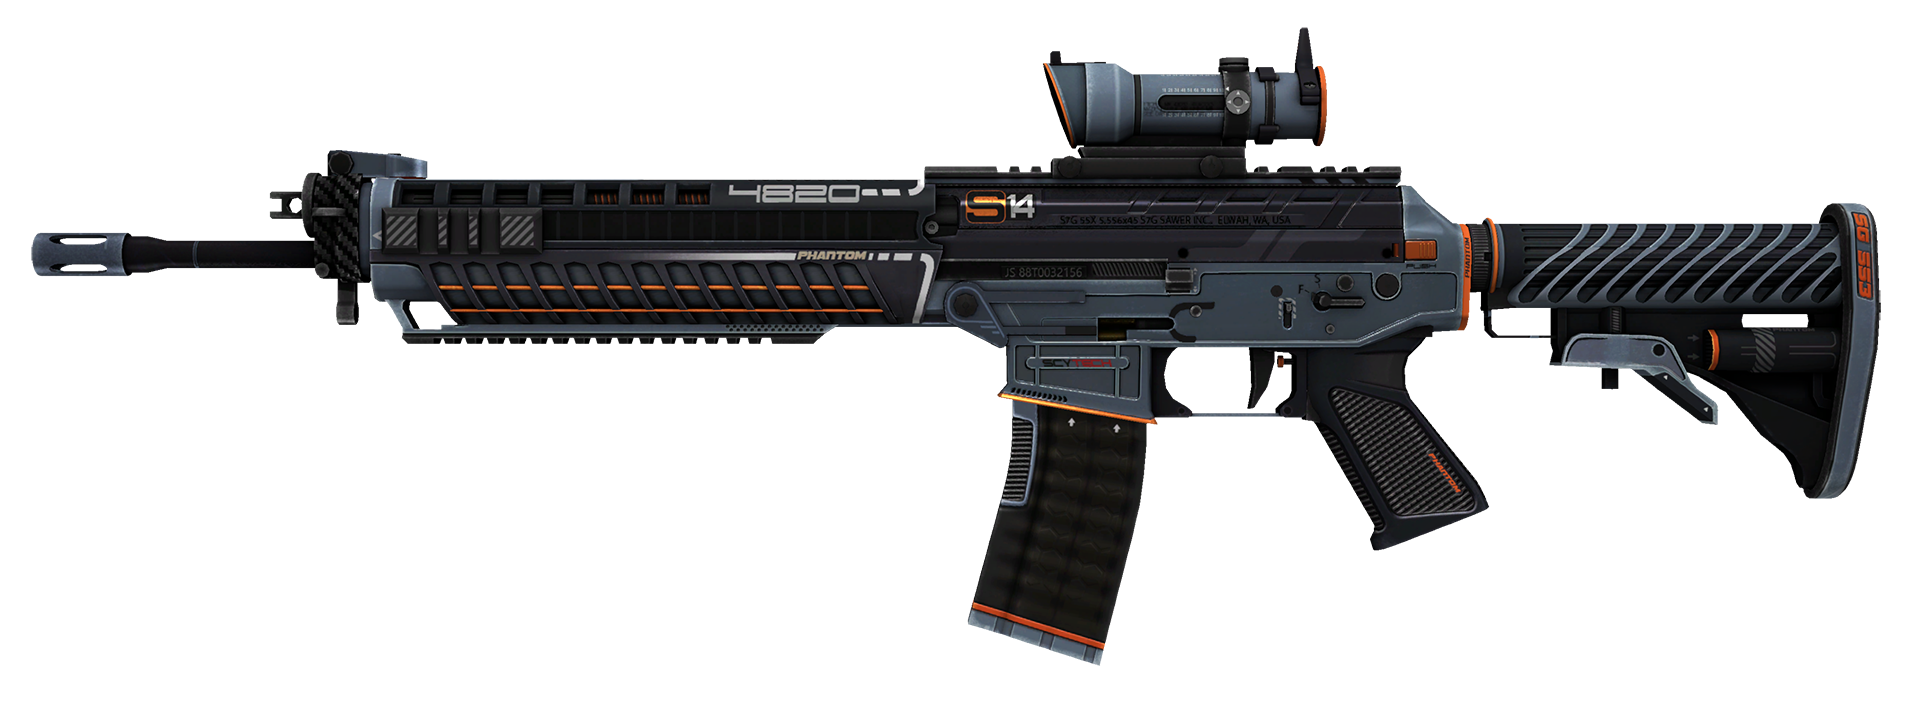 SG 553 Aerial cs go skin download the new version